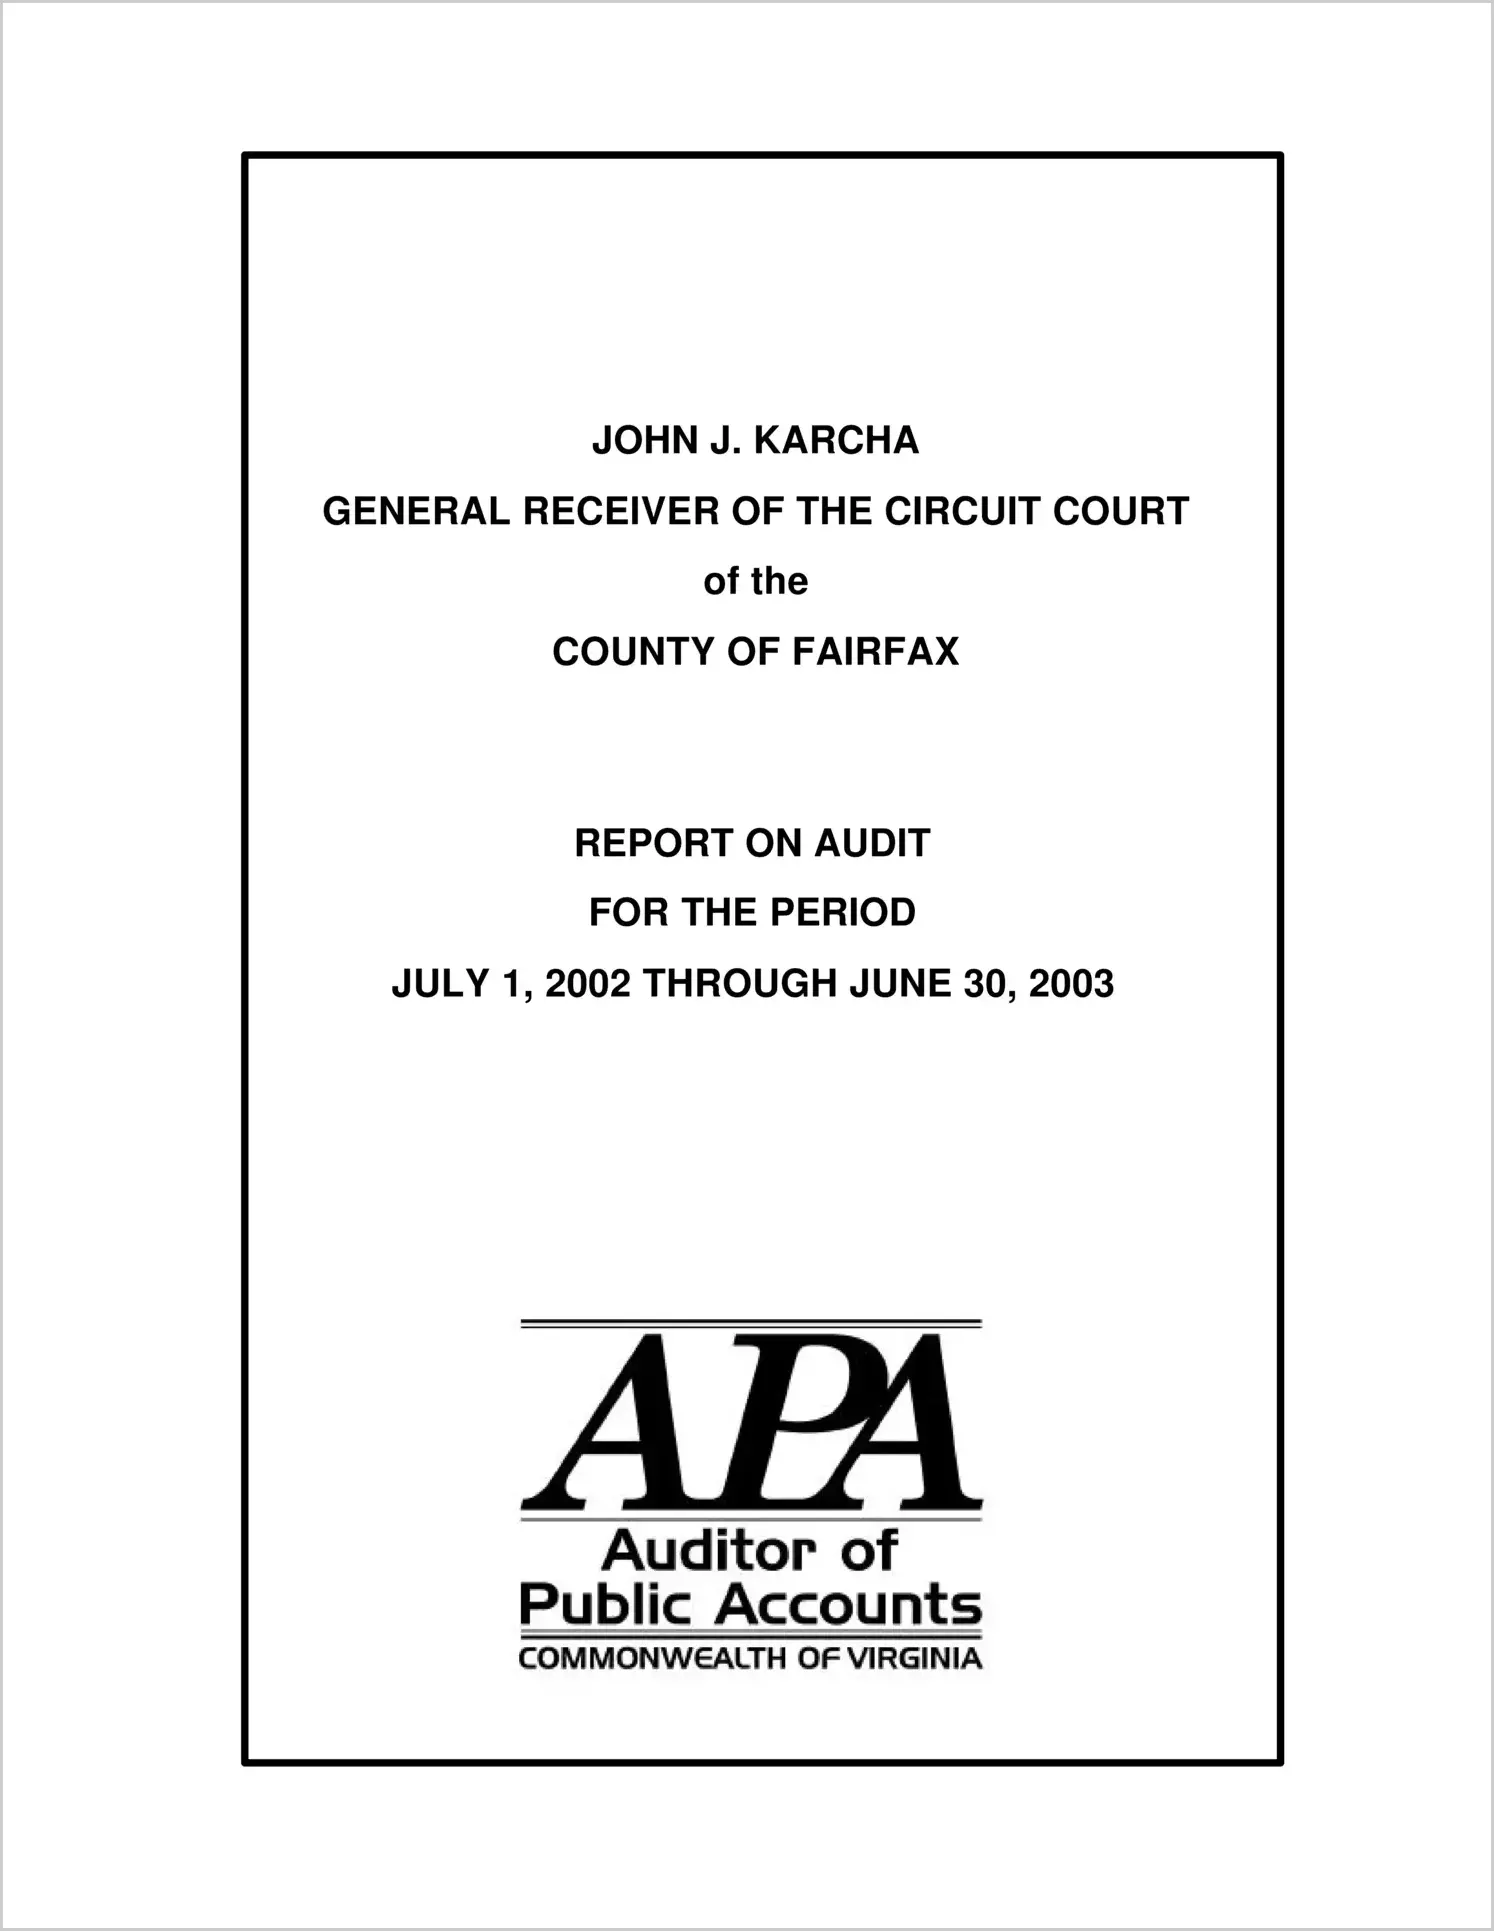 General Receiver of the Circuit Court of the County of Fairfax for the period July 1, 2002 through June 30, 2003